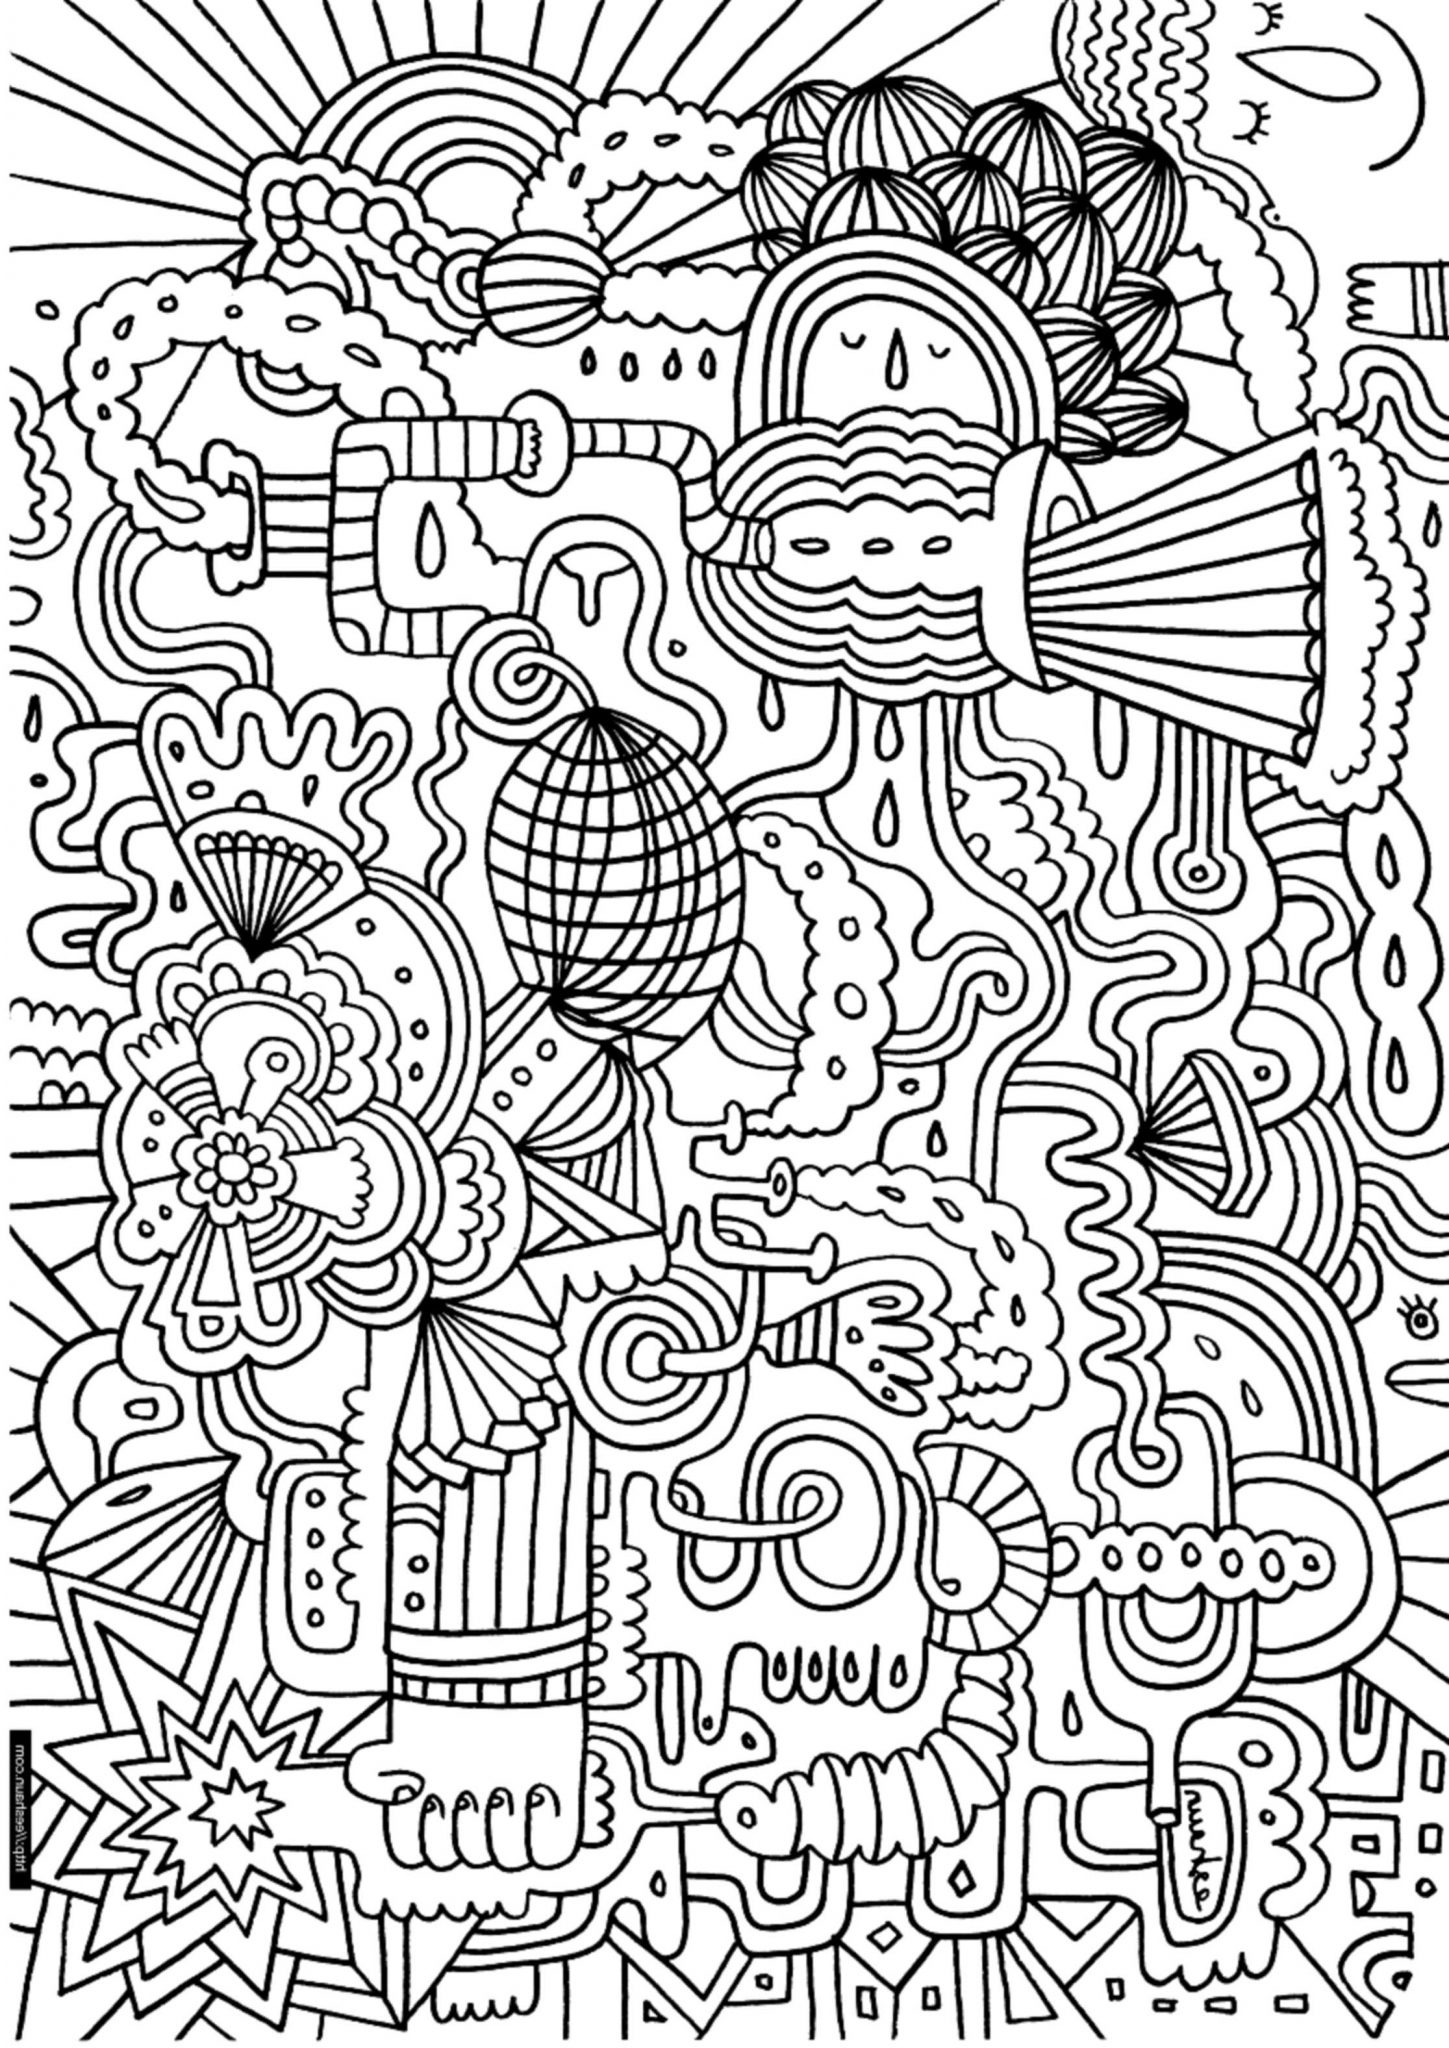 Print Download Complex Coloring Pages for Kids and Adults